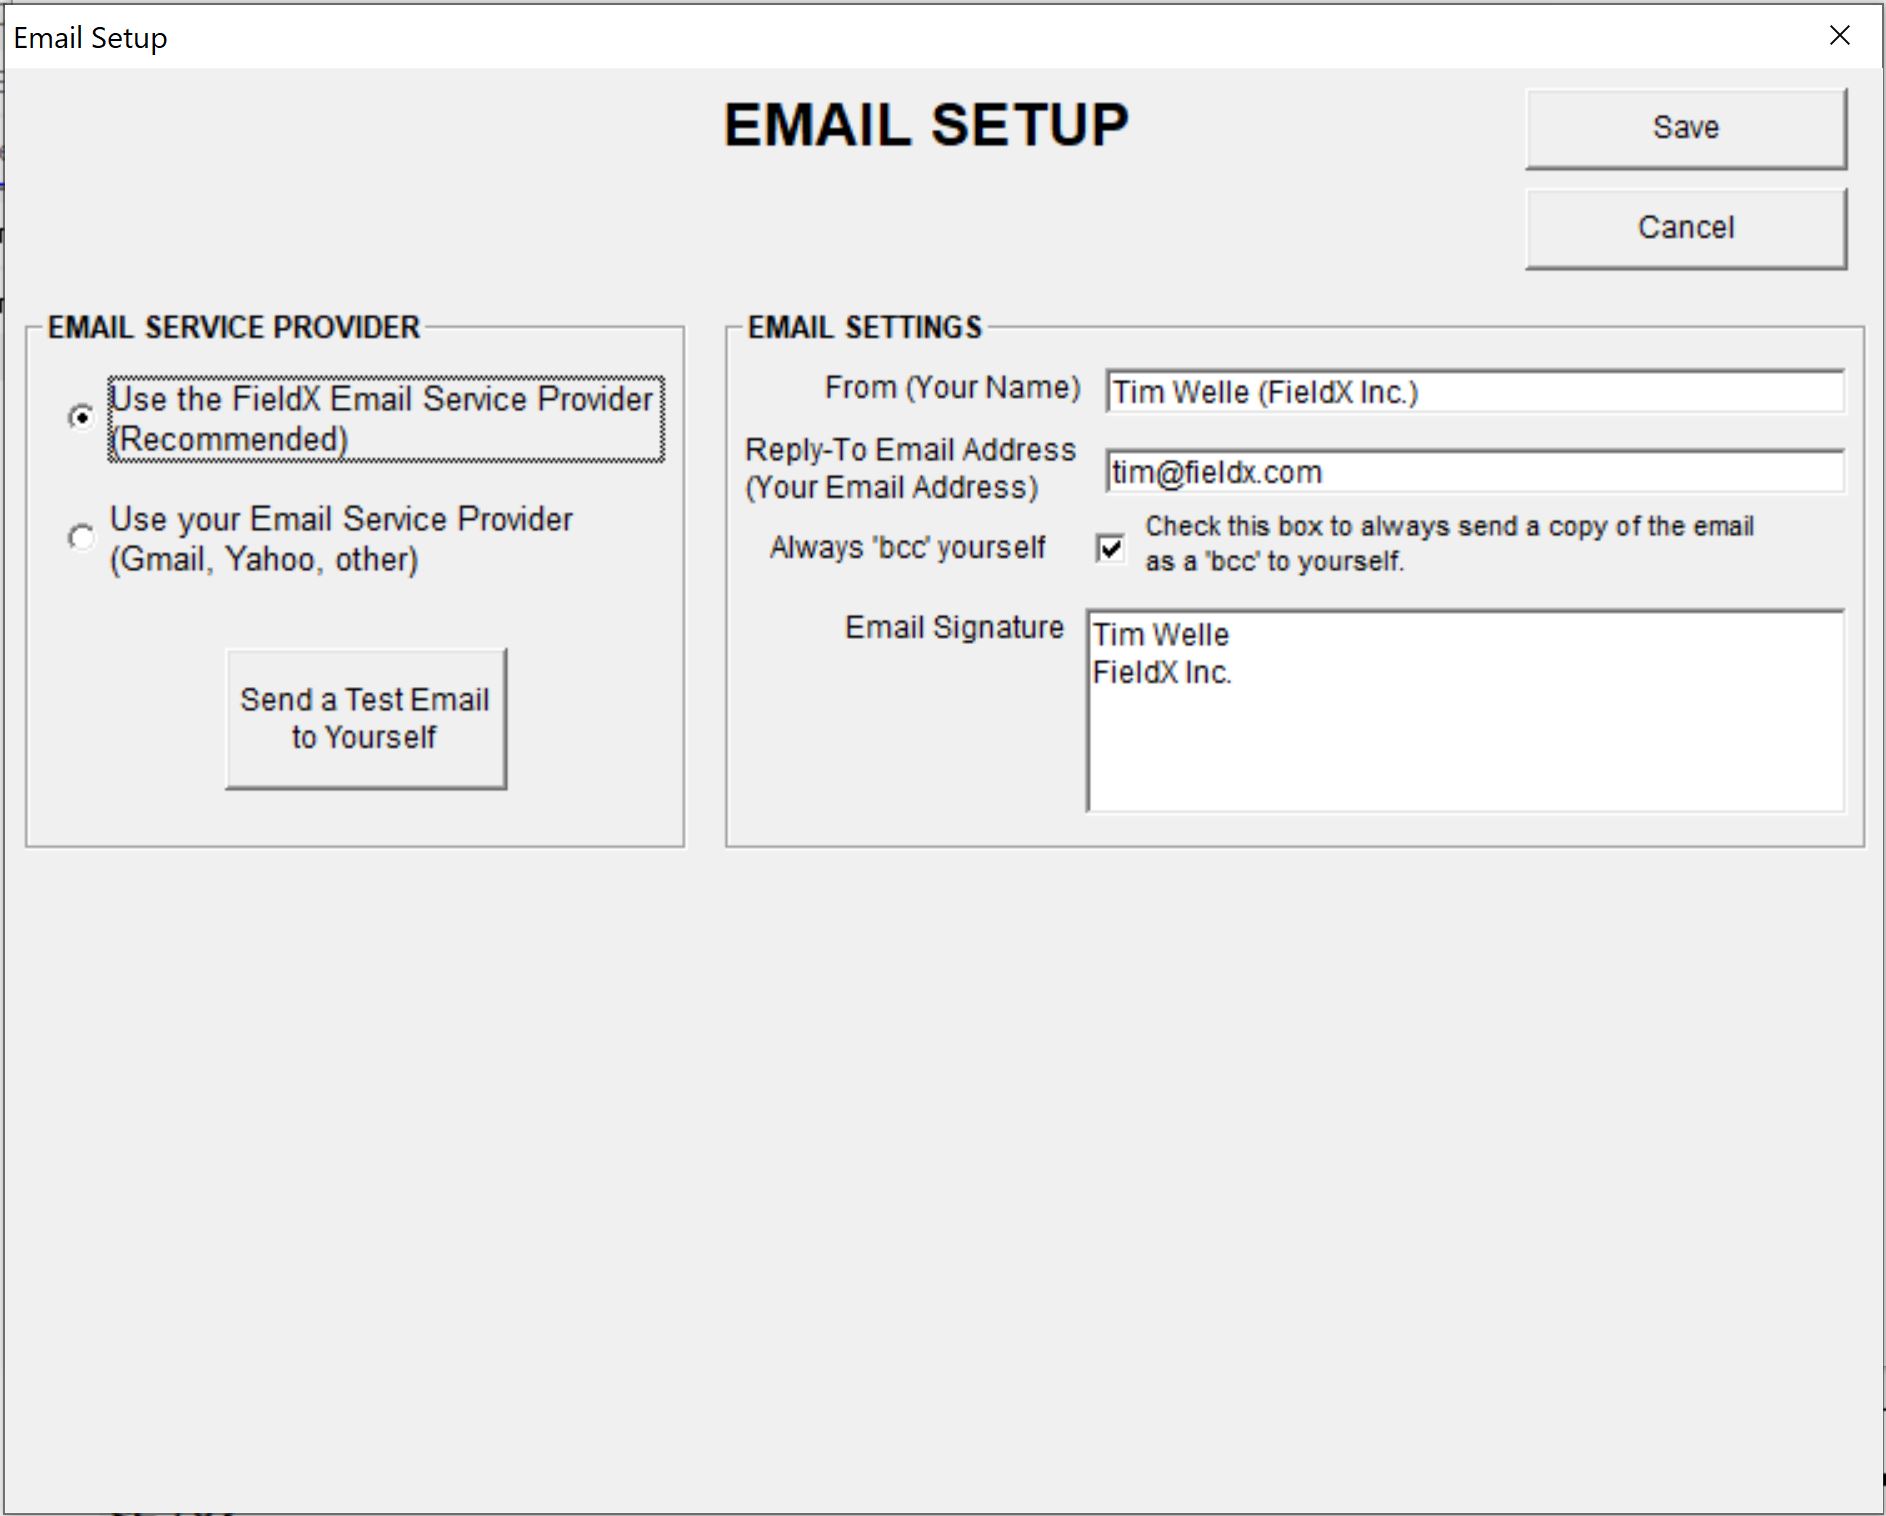 Setup with FieldX Email Service Provider